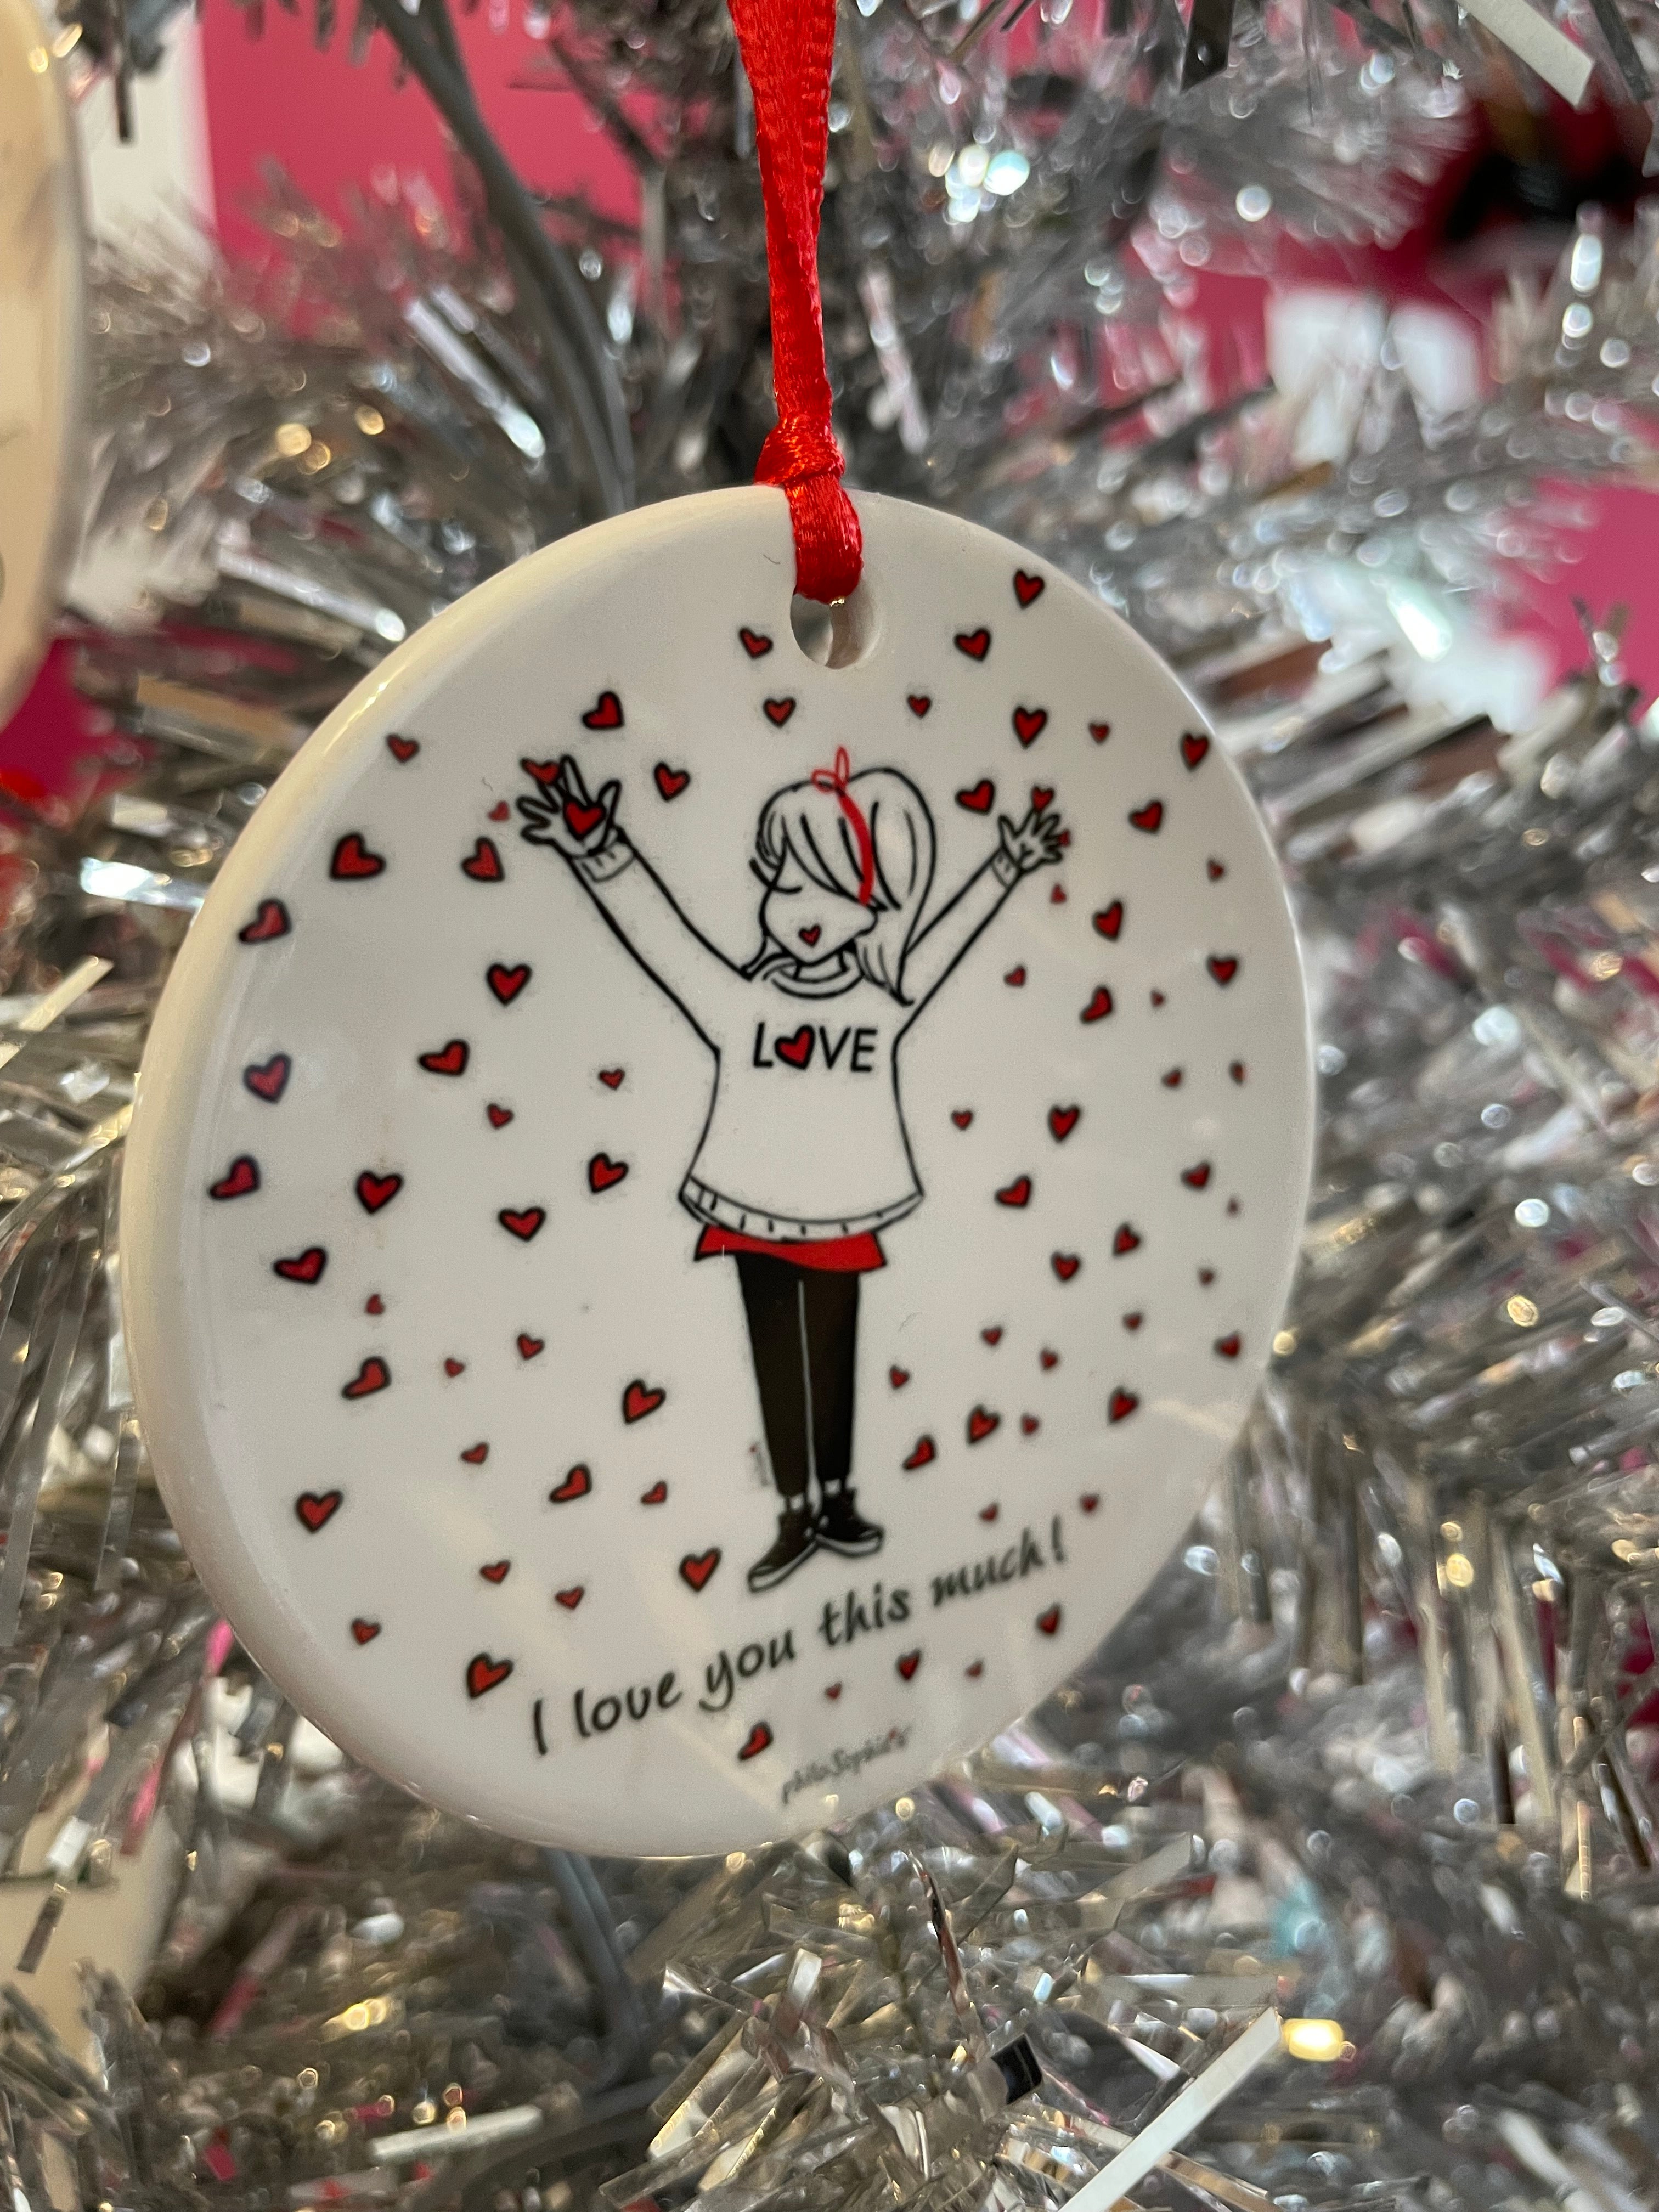 philoSophie's Ornament - I love you this much!